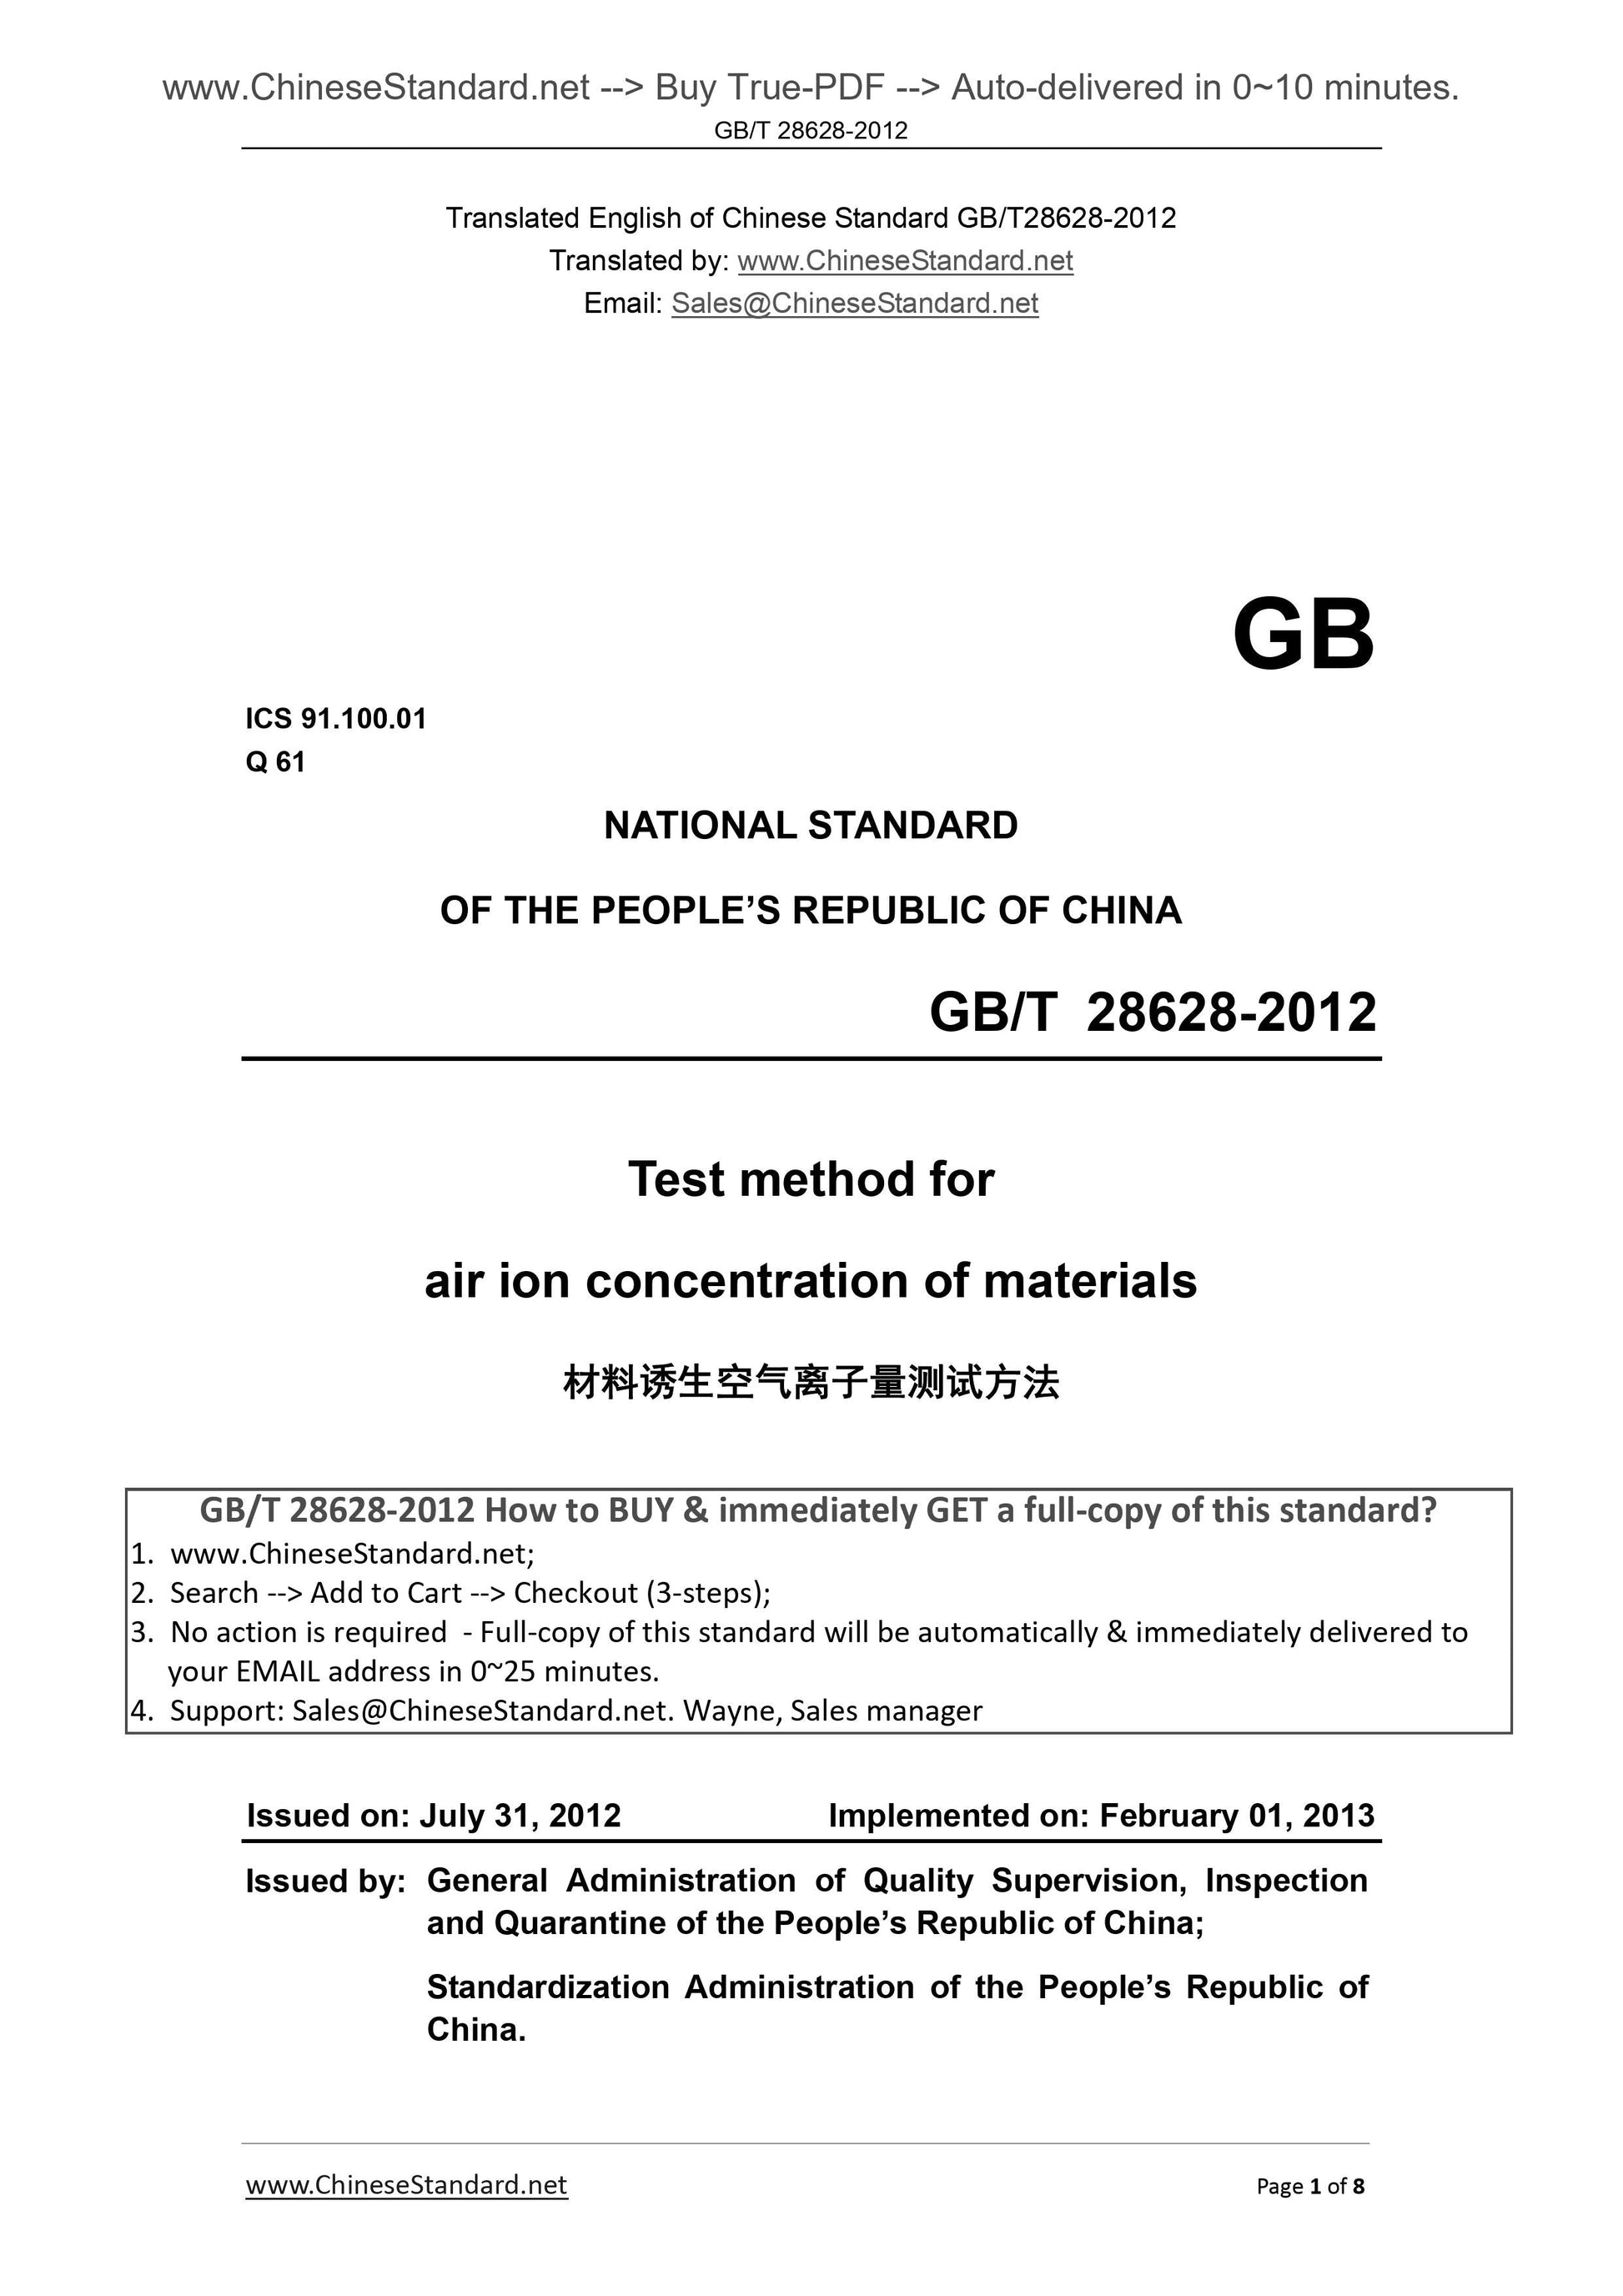 GB/T 28628-2012 Page 1